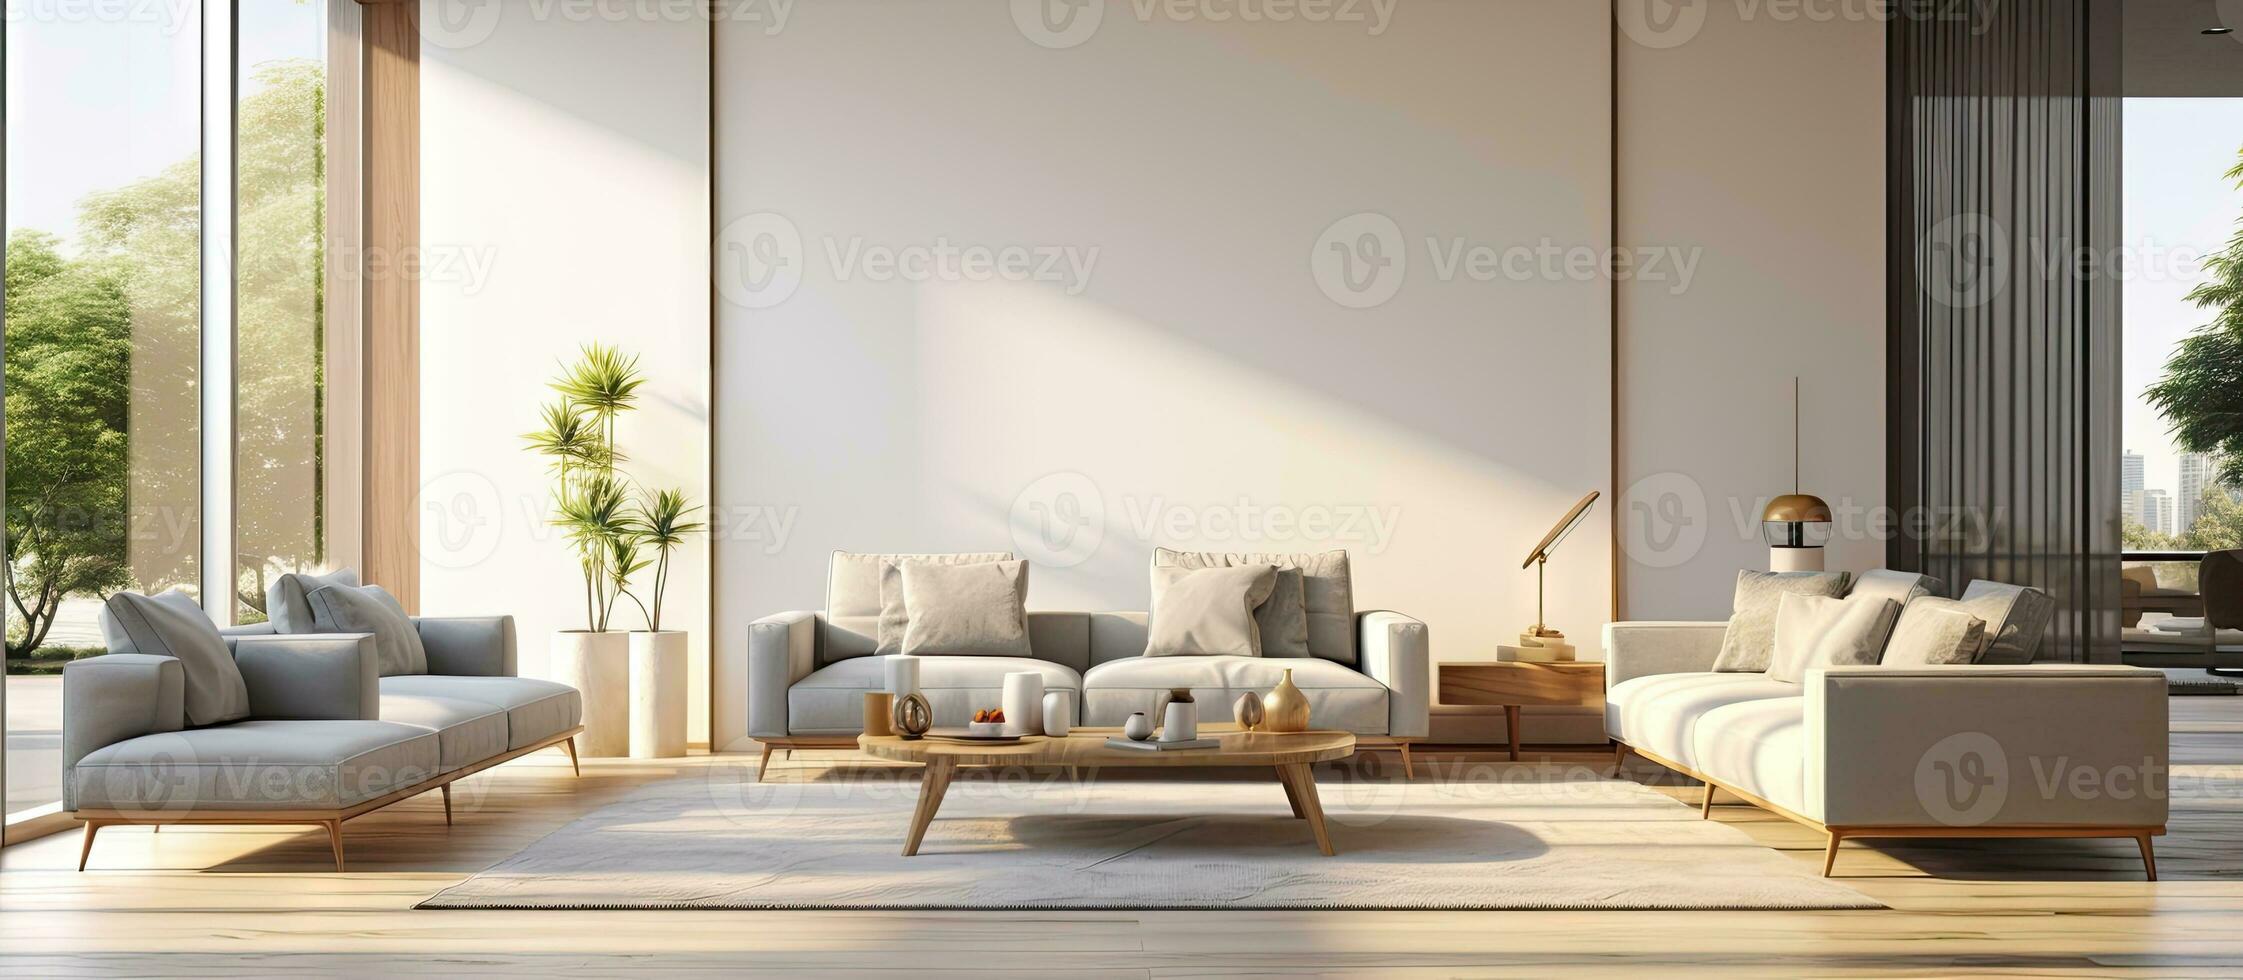 ed computer illustration of a spacious upscale and contemporary living room with bright and modern interiors photo